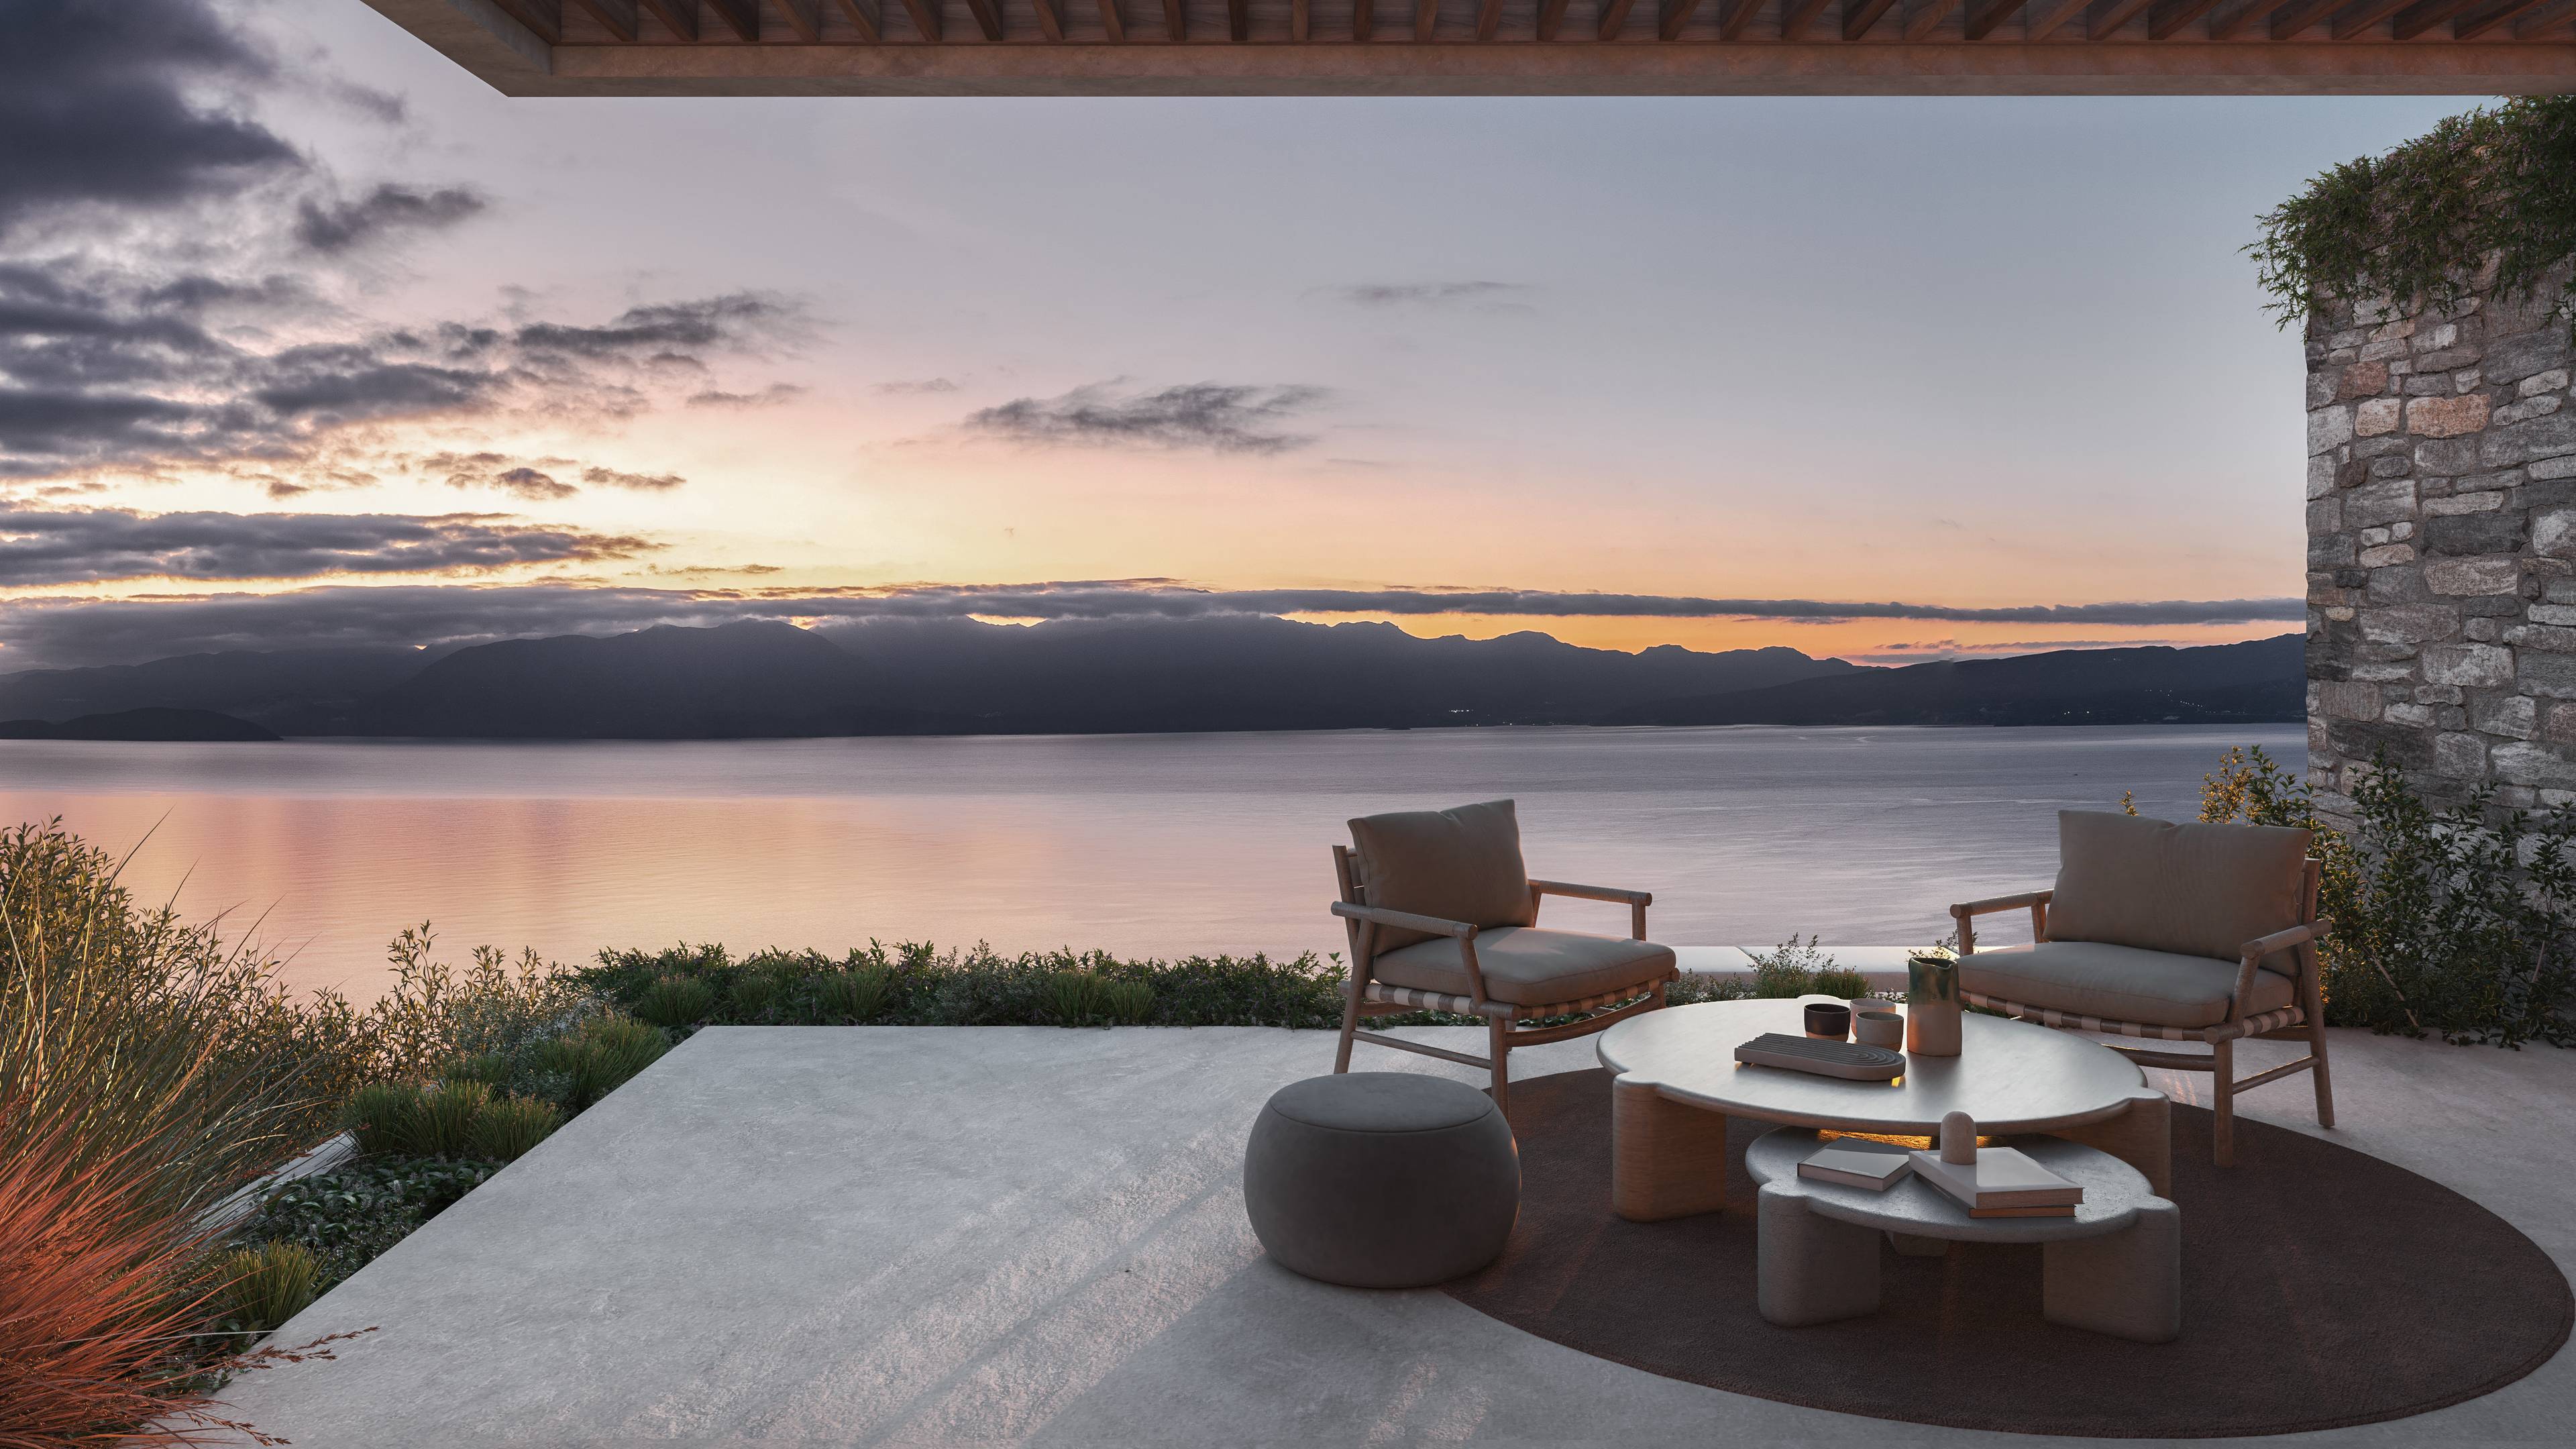 Luxury 4/5-Bedroom Seafront Villa in a Sustainable Private Resort in the Heart of Crete with Maid or Guest Quarters, Infinity-Edge Swimming Pool and Full Sea Views